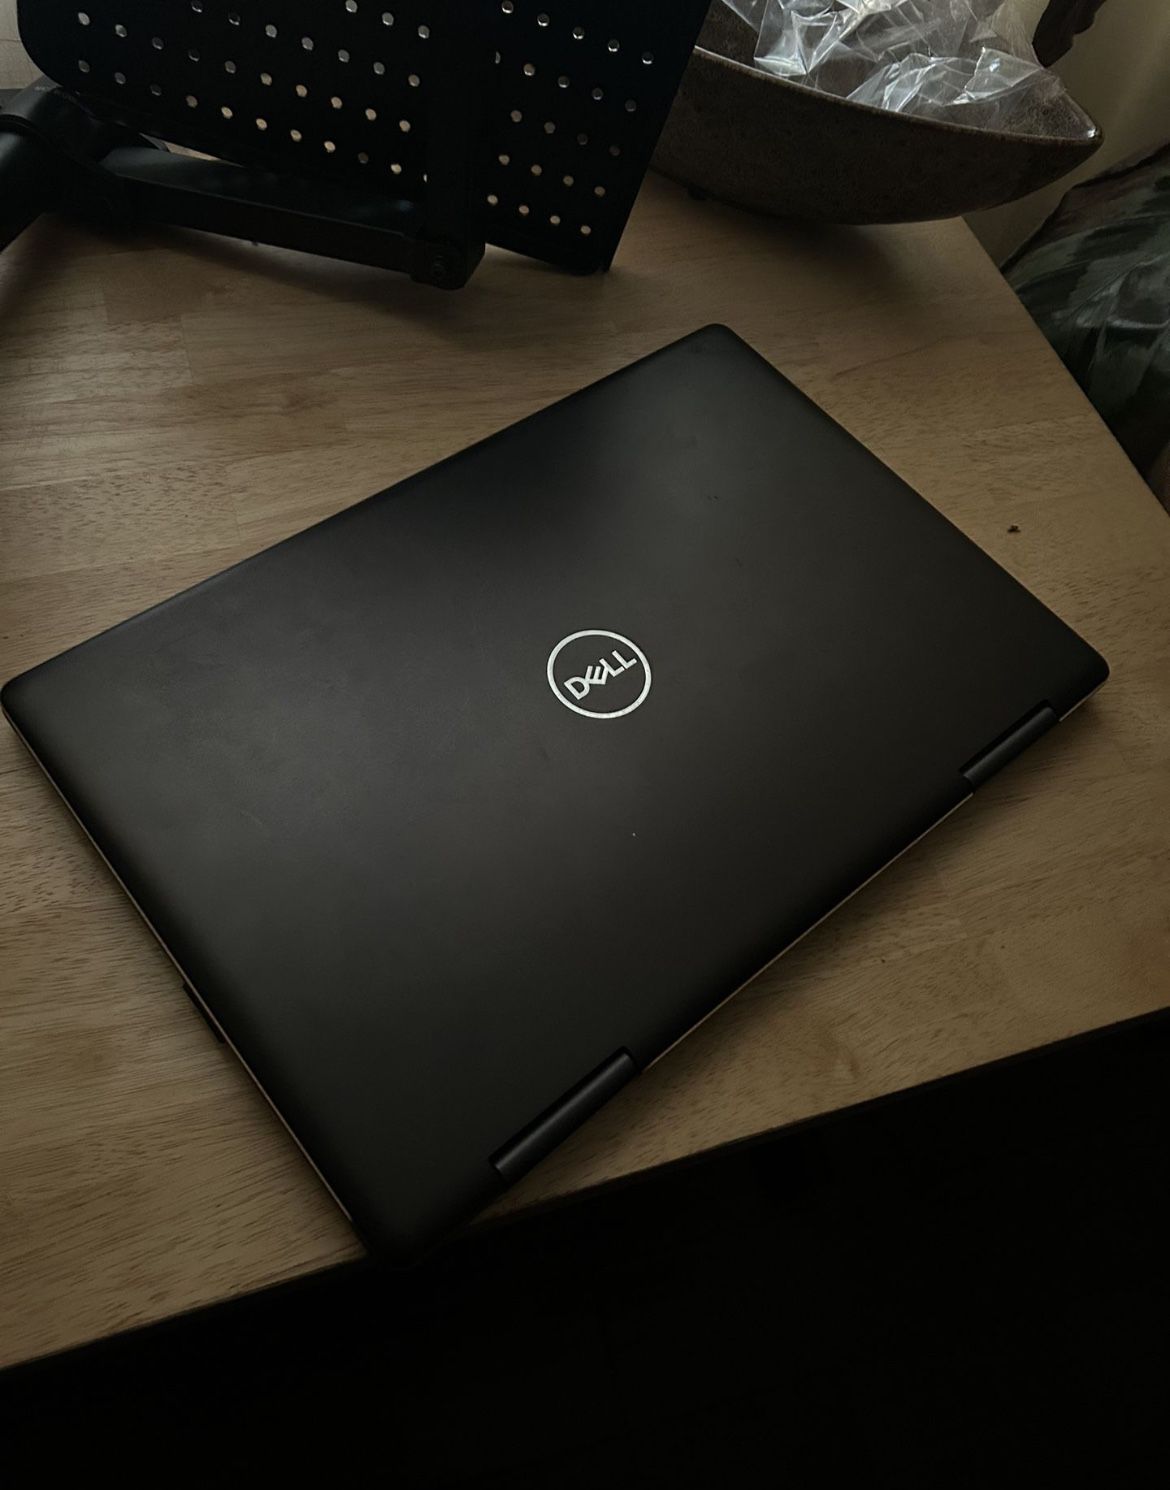 Dell Inspiron 15 7000 2 In 1 Laptop Computer 